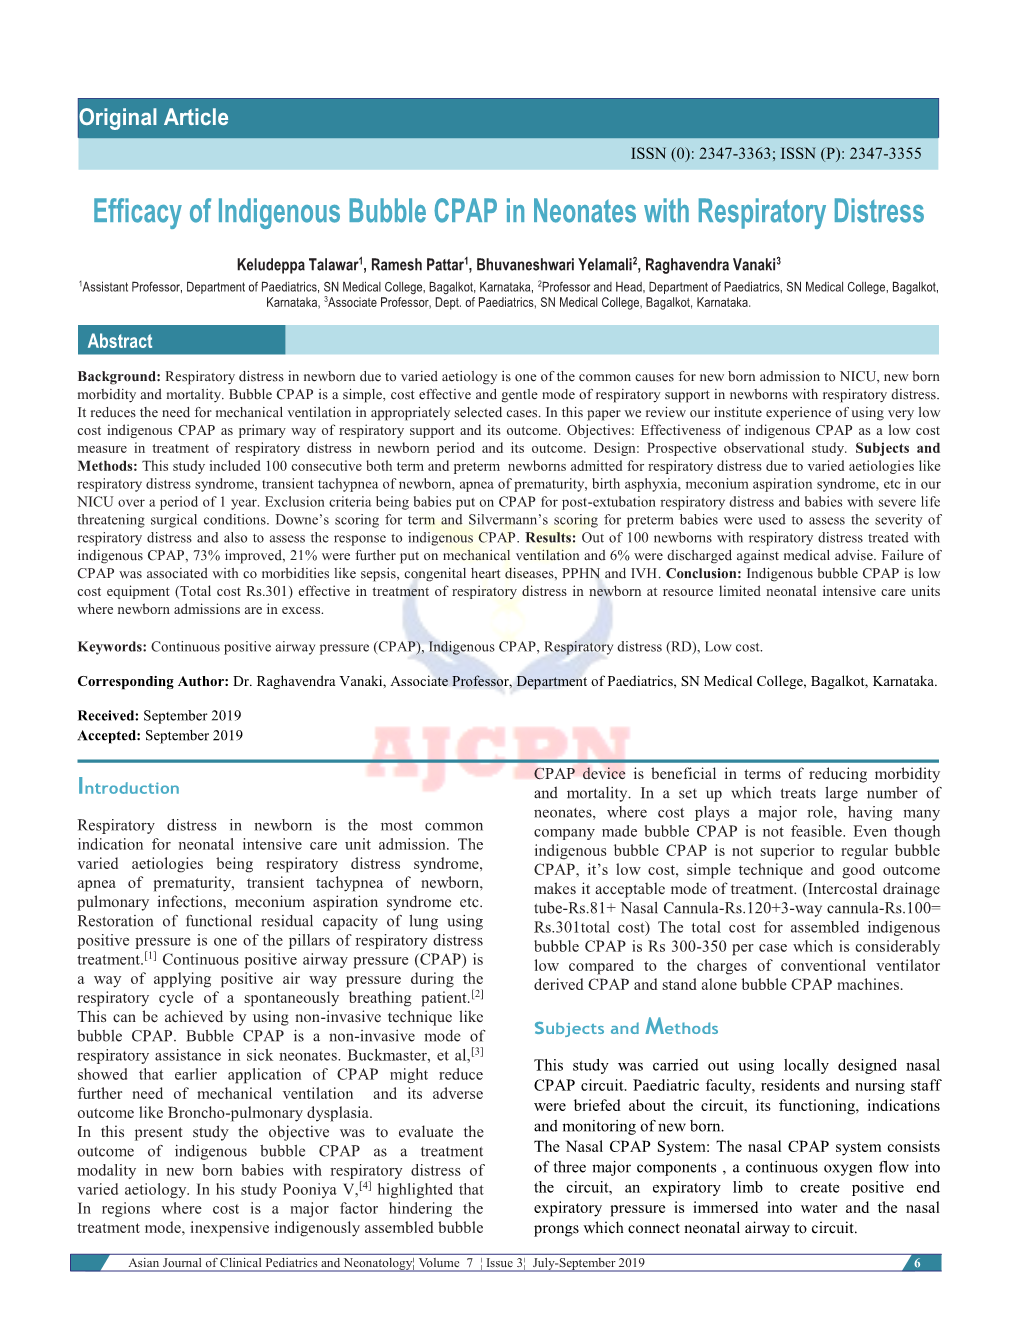 Efficacy of Indigenous Bubble CPAP in Neonates with Respiratory Distress